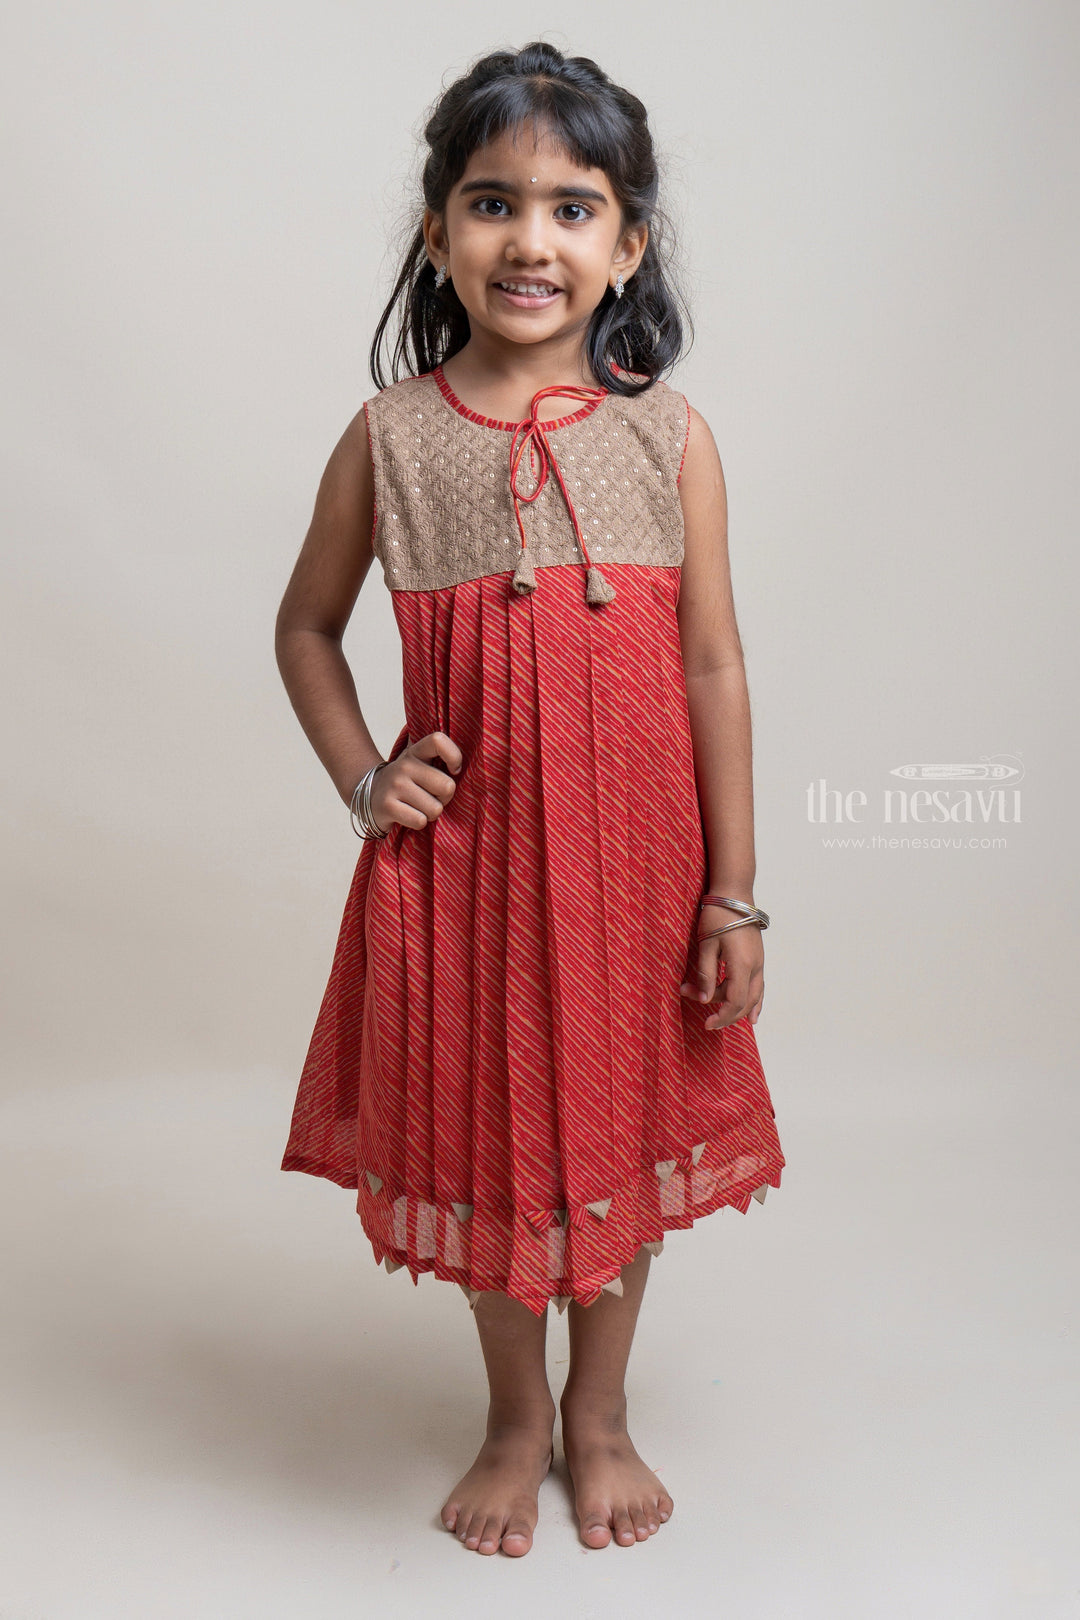 The Nesavu Girls Cotton Frock Stunning Red Sleeveless Pleated Cross Line Printed Frock For Girls Nesavu 16 (1Y) / Red / Cotton GFC988B-16 Latest Collection For Girls | Fancy Frock For Girls | The Nesavu